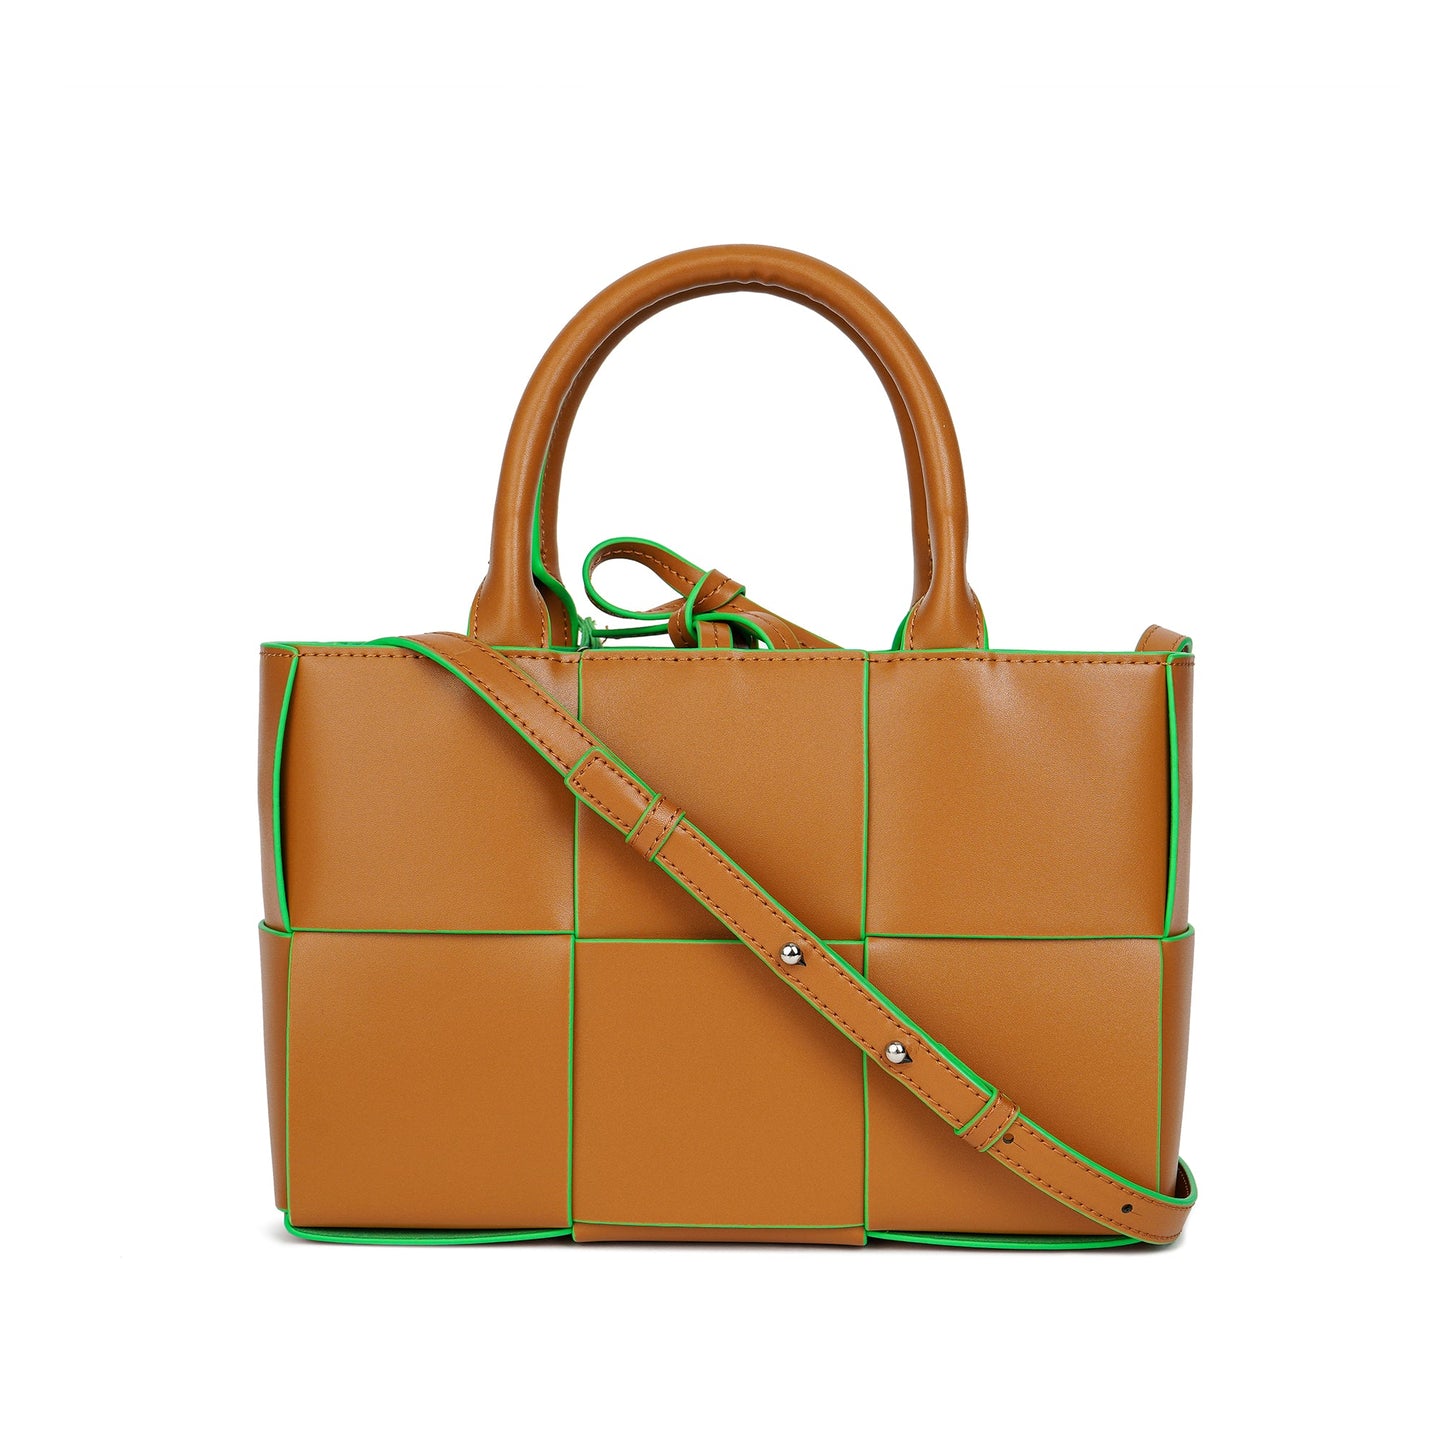 Woven Smooth Leather Top-Handle Shoulder Bag